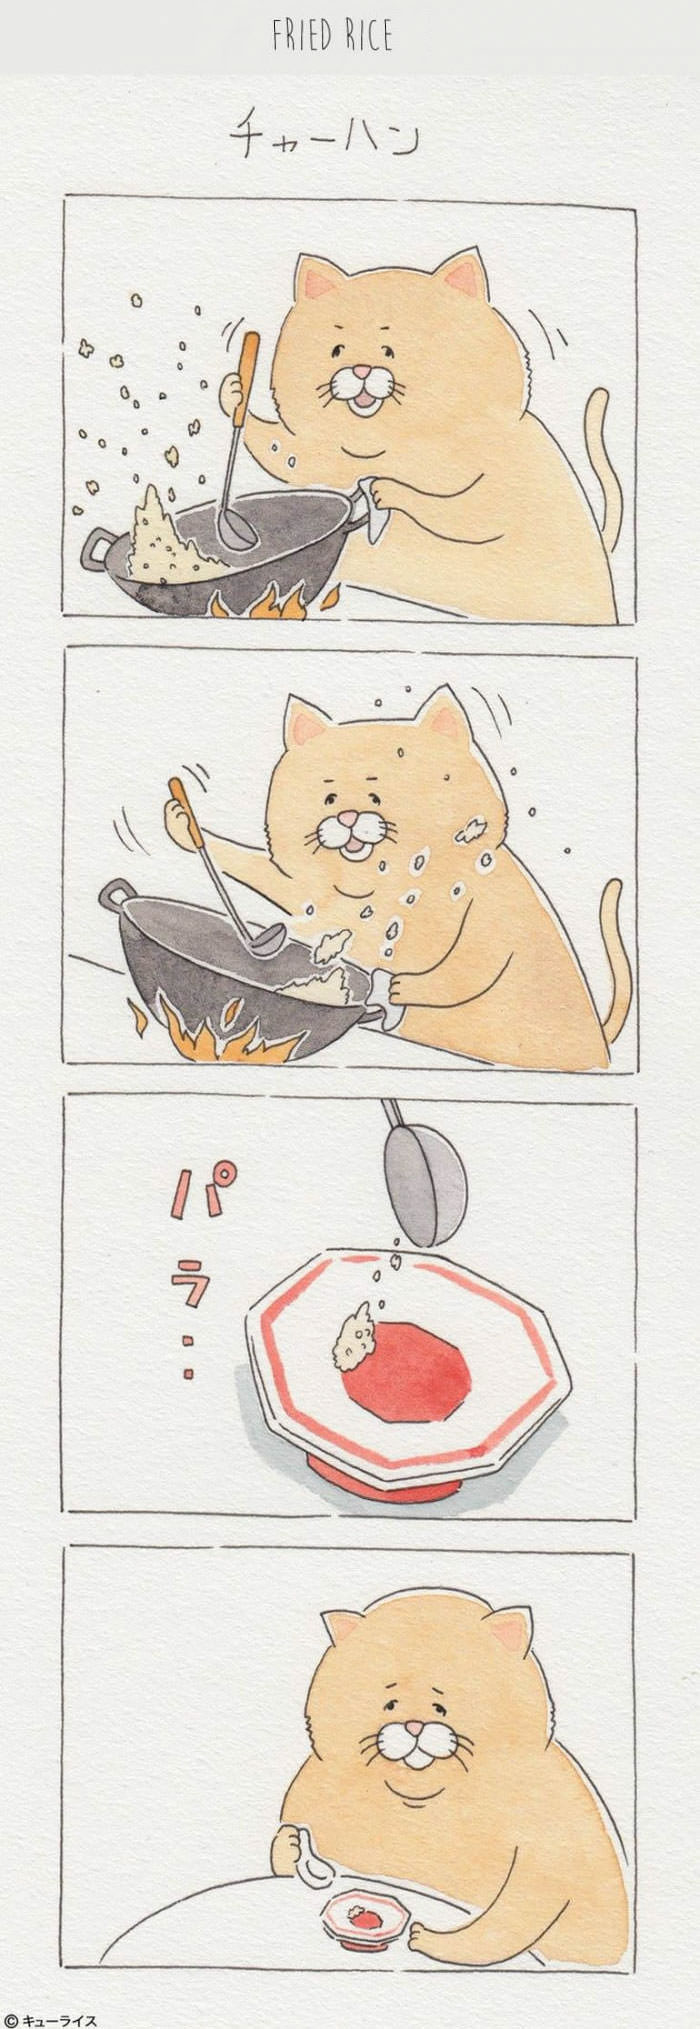 I've Made 8 Hilariously Chubby Cat Comics About Food Fails That Are Way Too Relatable